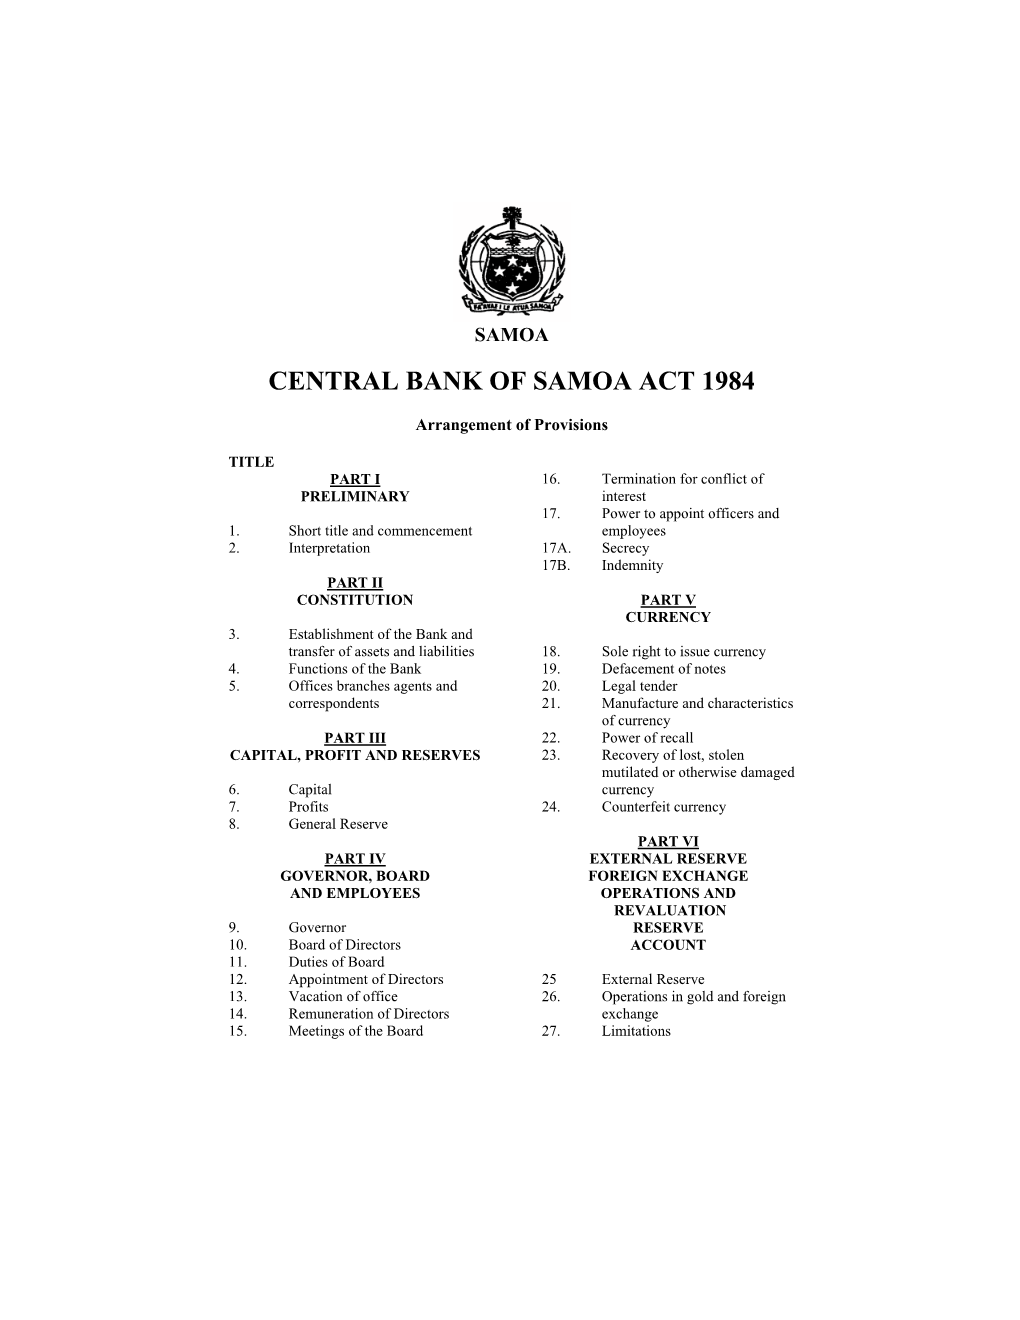 Central Bank of Samoa Act 1984